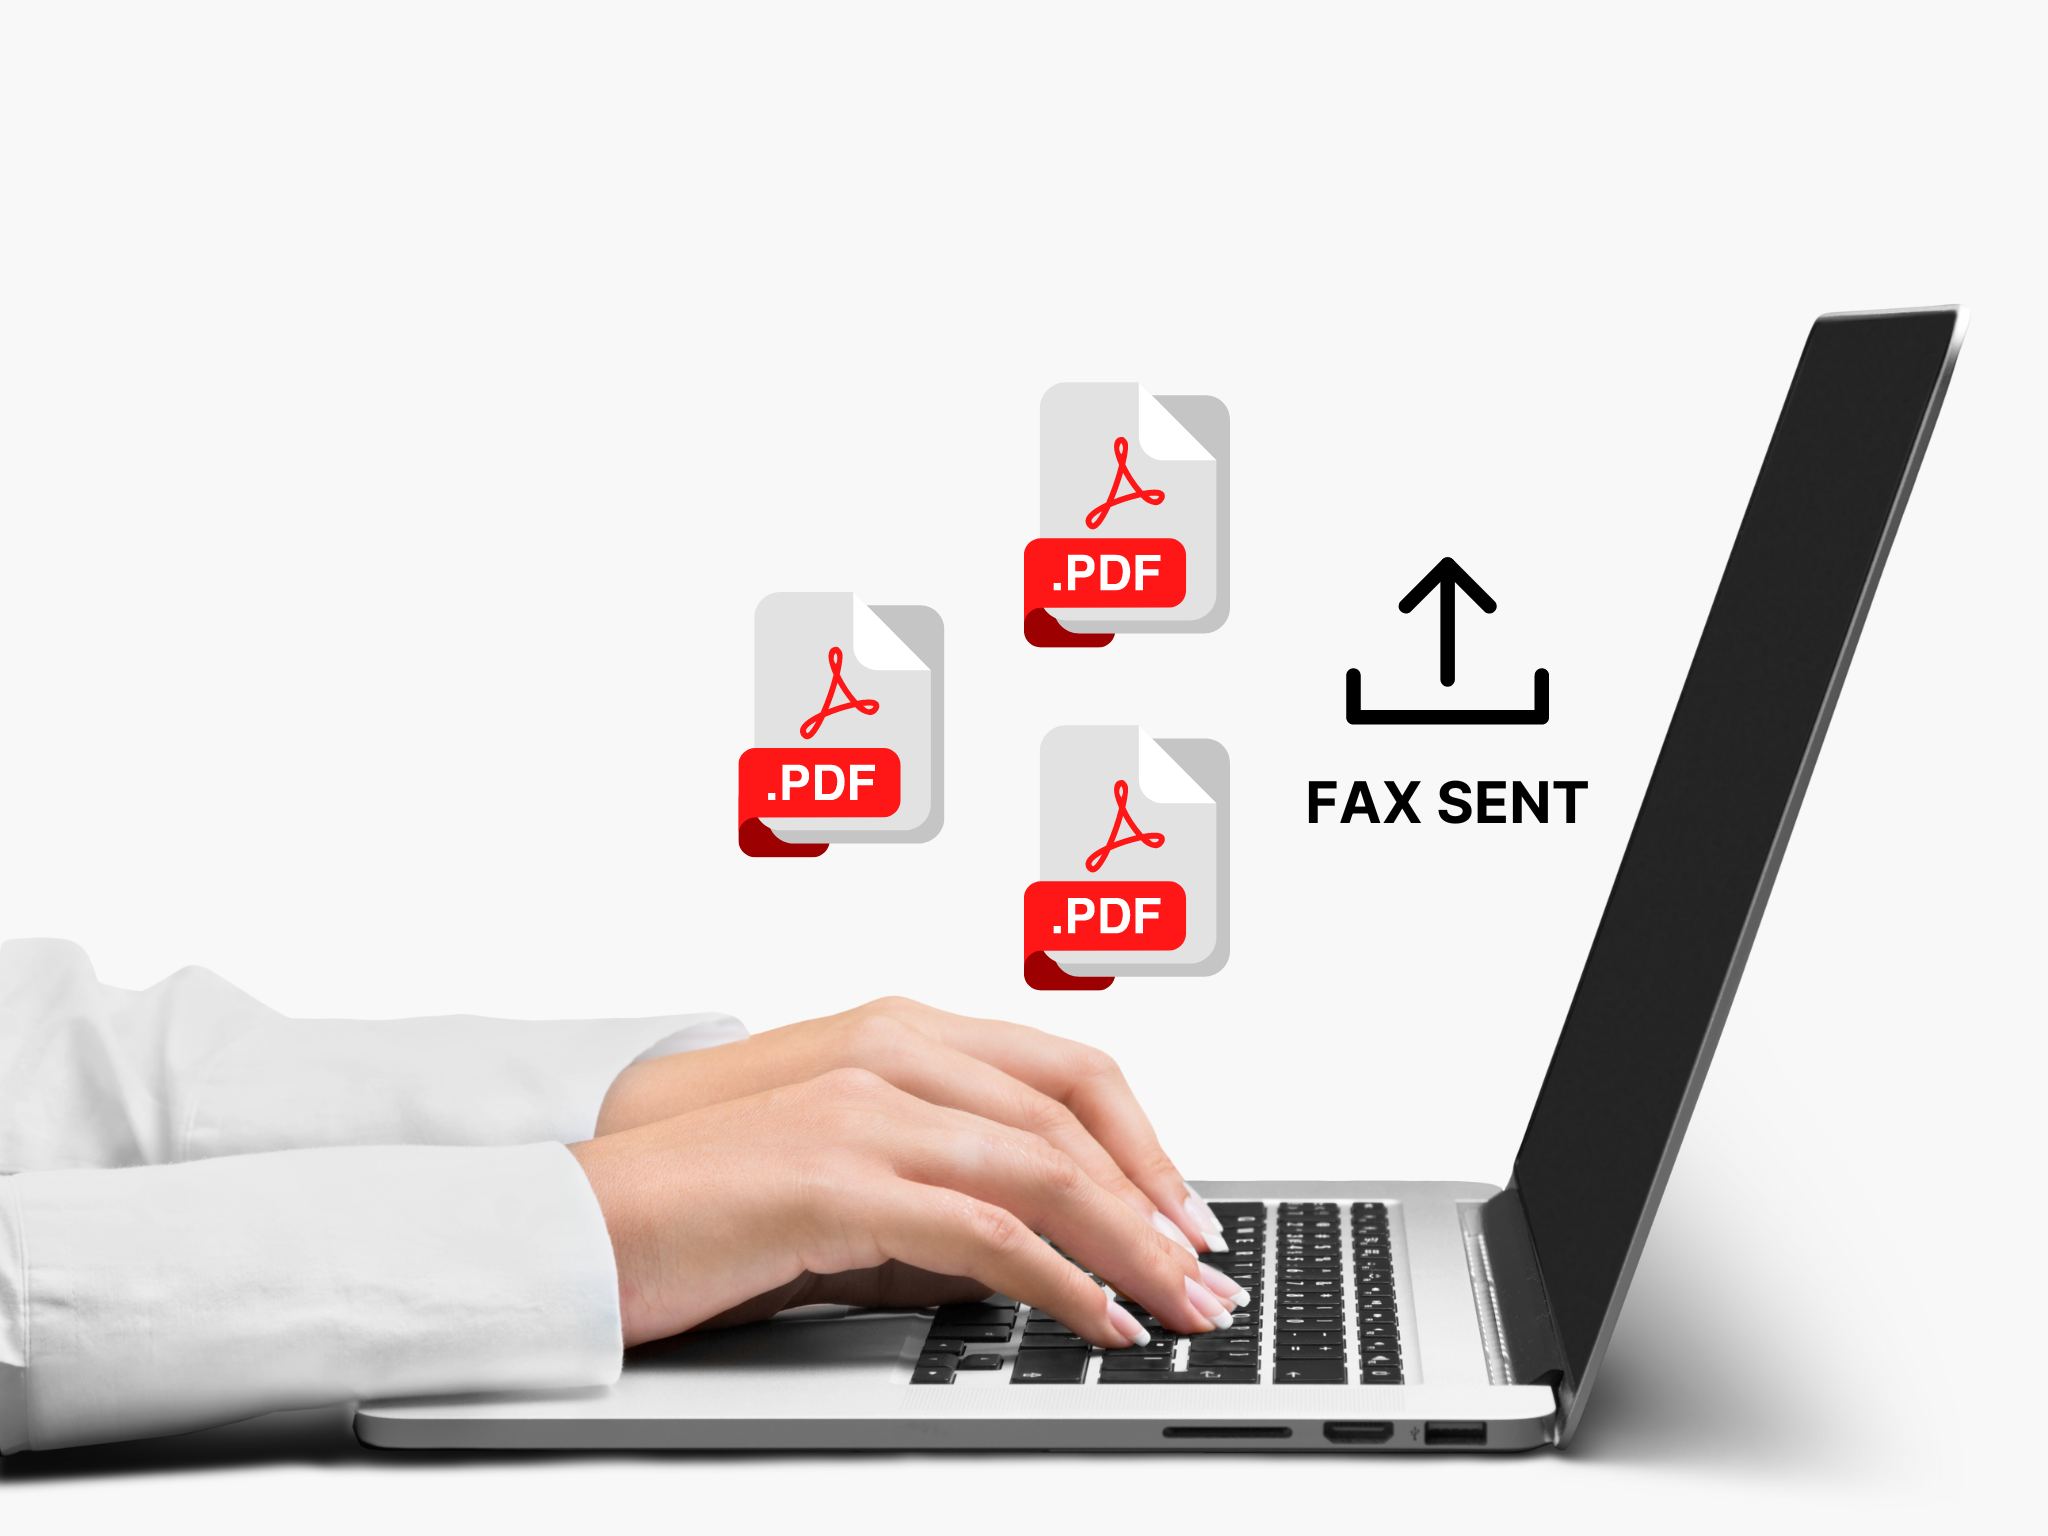 fax a pdf online securely